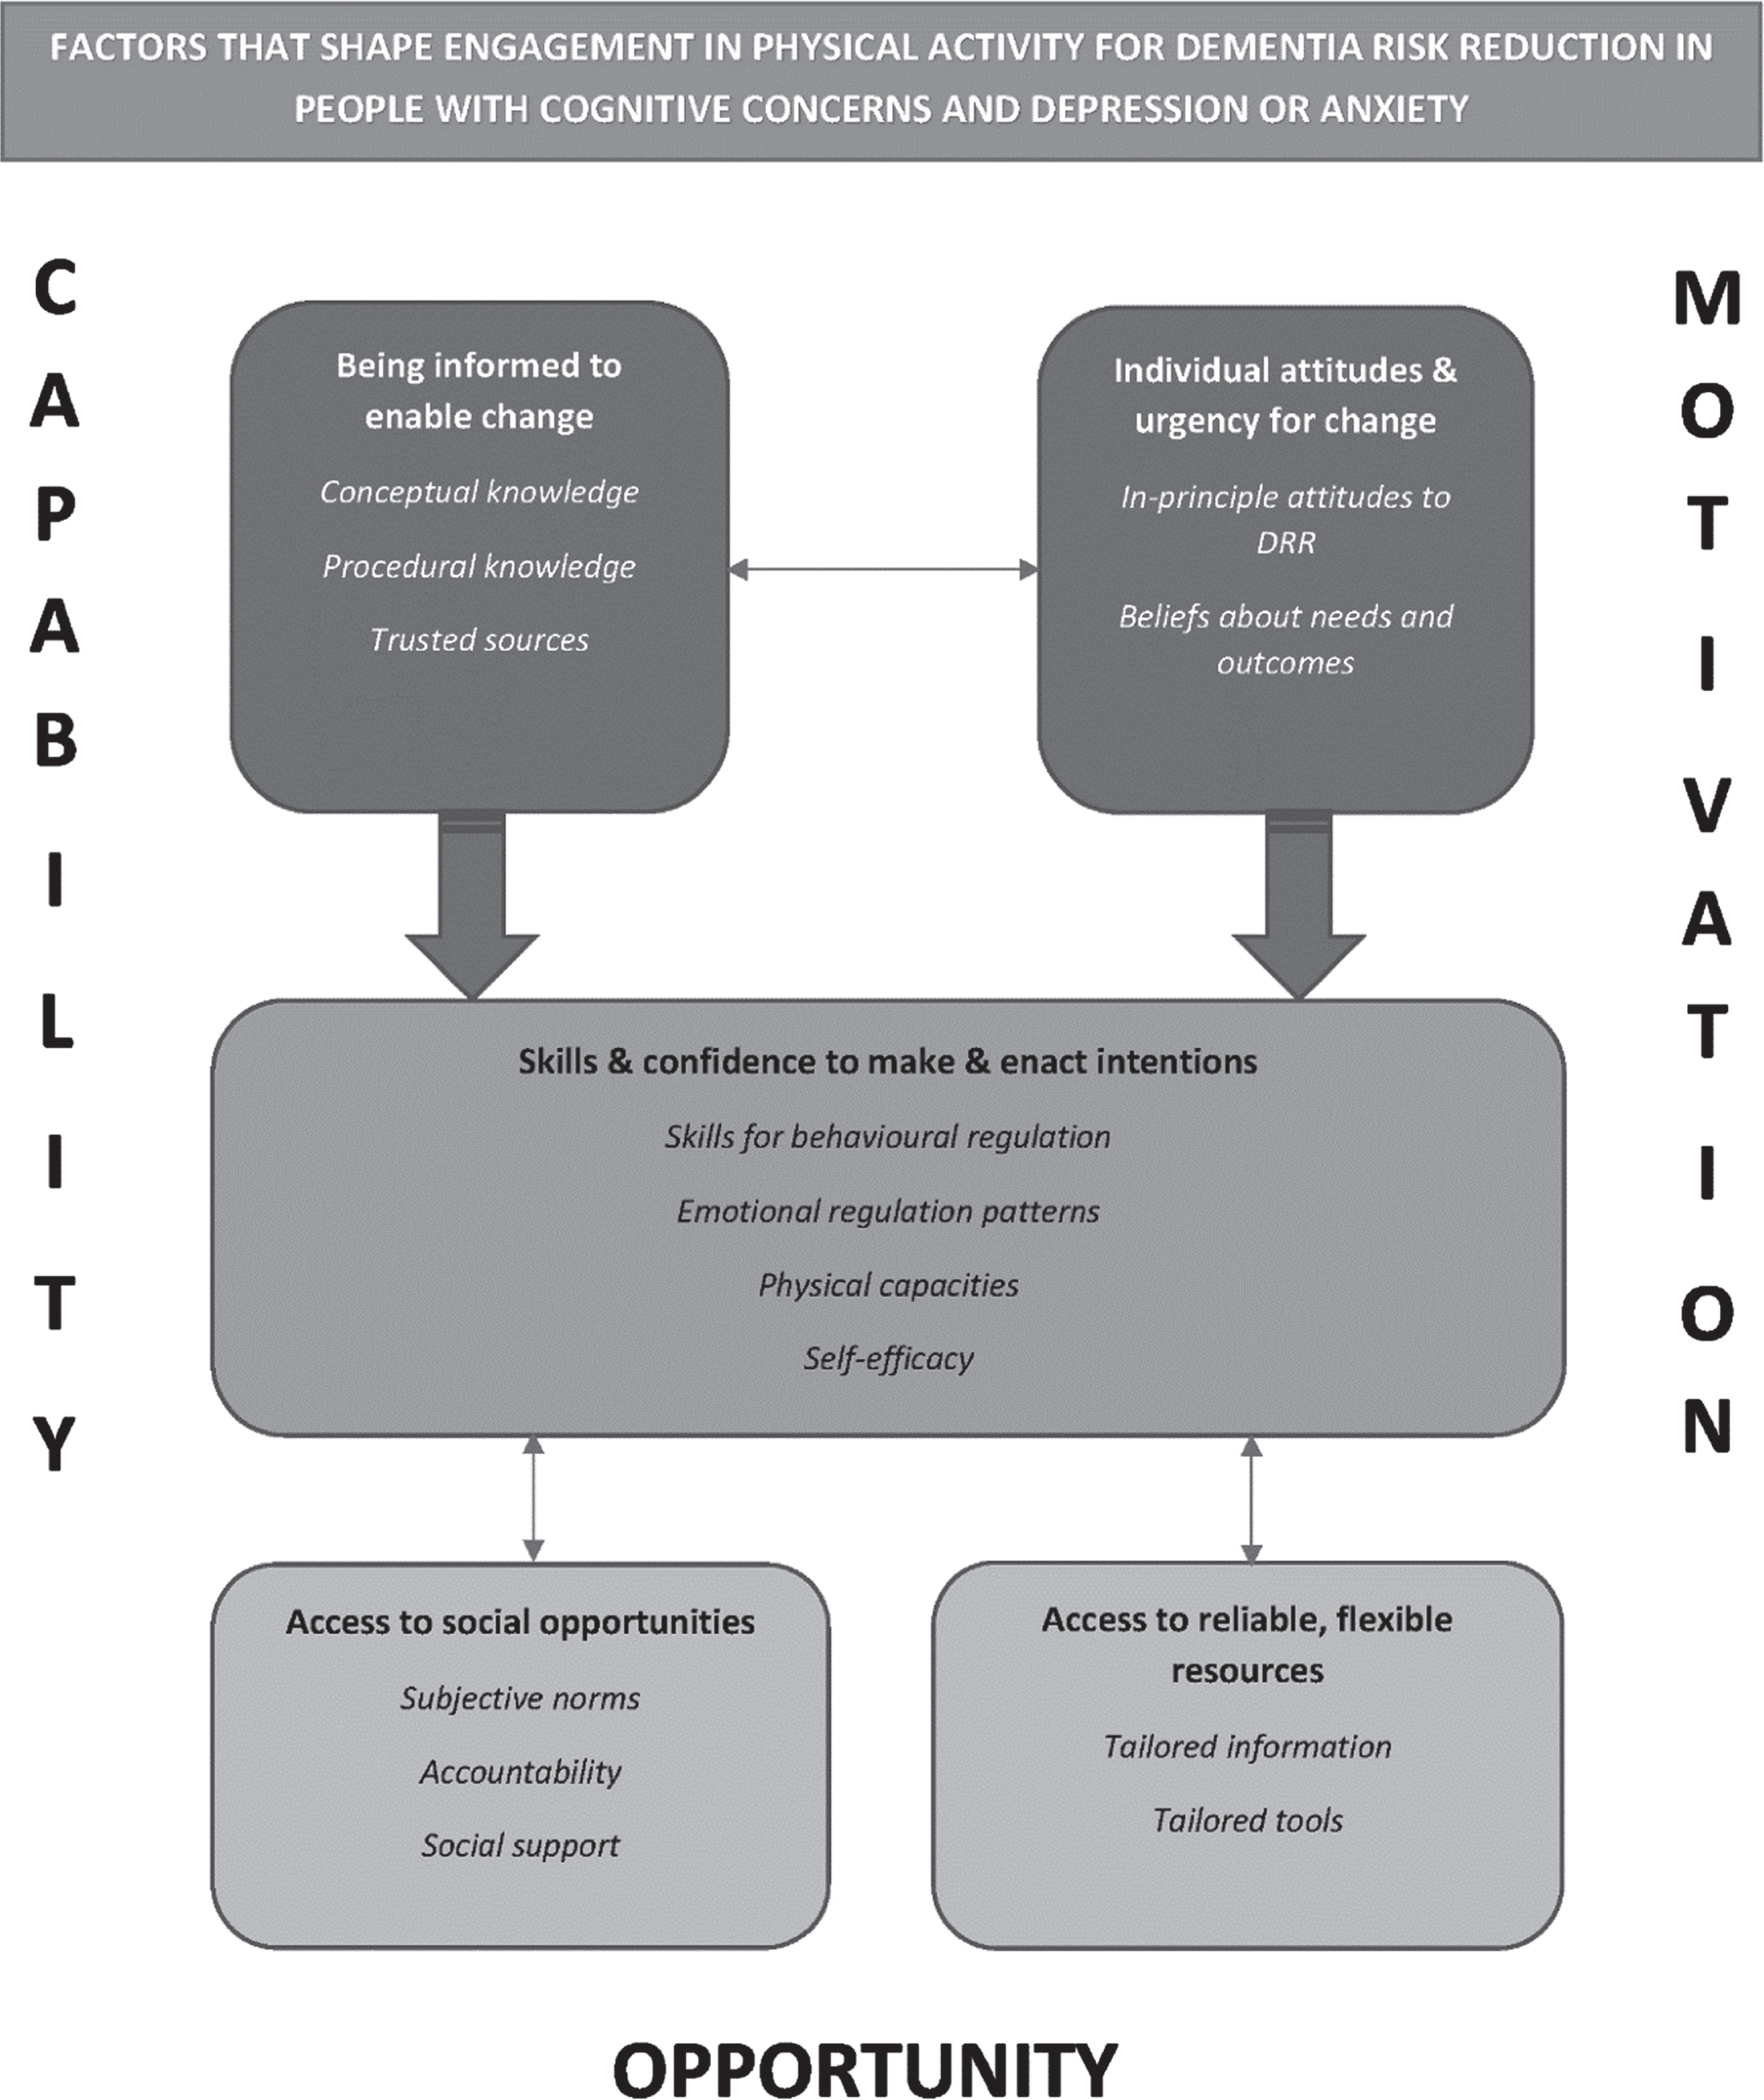 Integrated model of mechanisms of action for interventions to support adoption and maintenance of physical activity for cognitive health by middle-aged and older people living with cognitive concerns and depressive or anxiety symptoms.